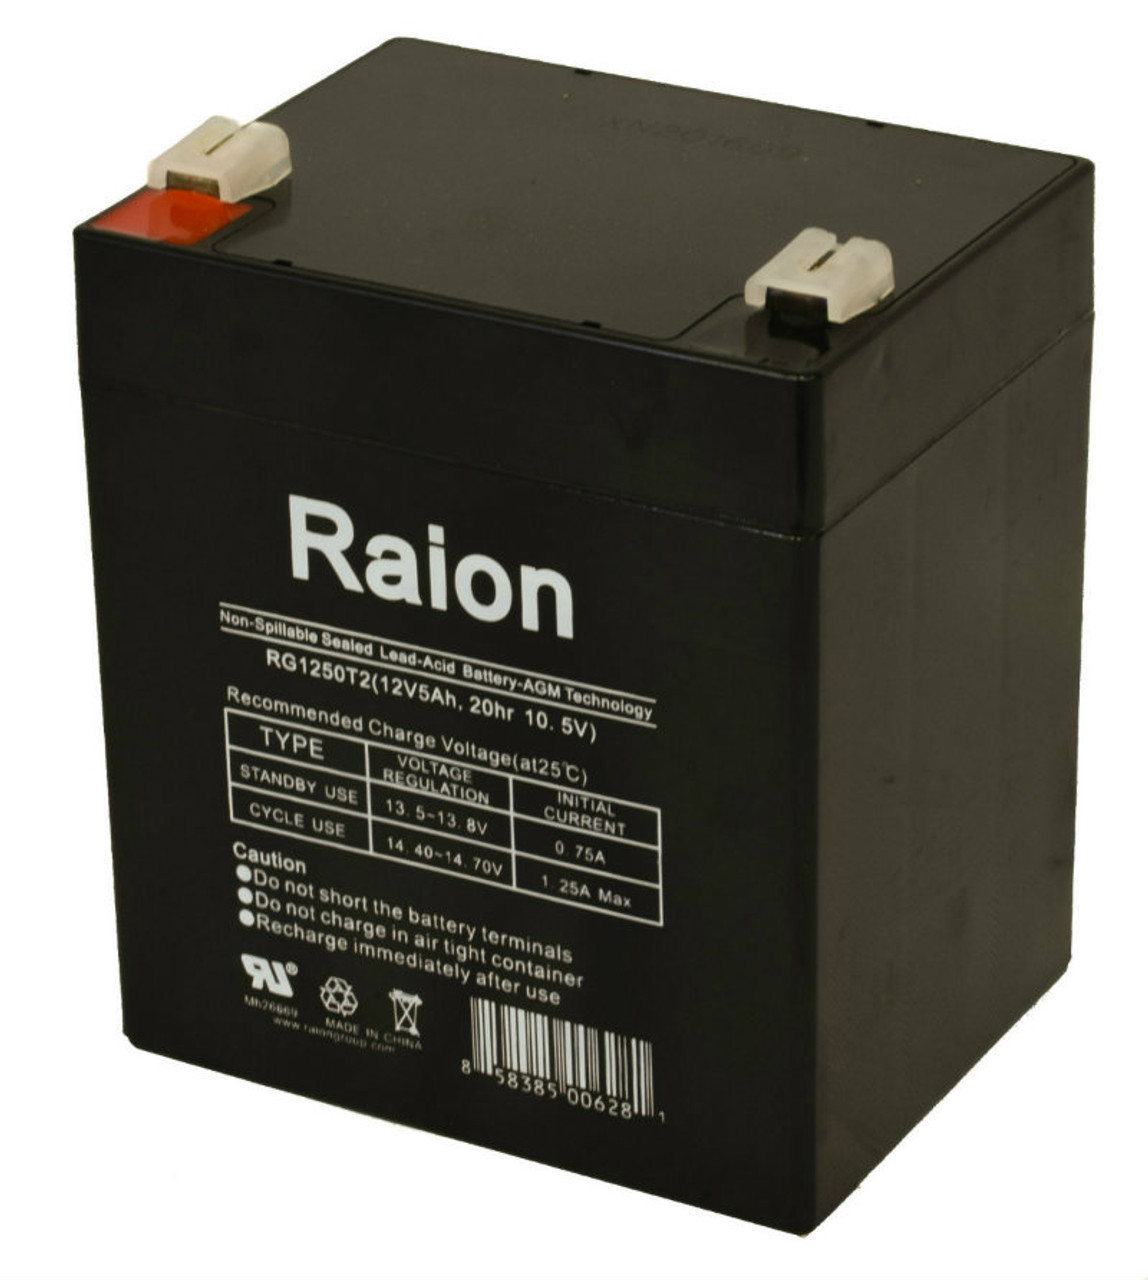 Raion Power RG1250T1 Replacement Alarm Security System Battery for Solex SB1240